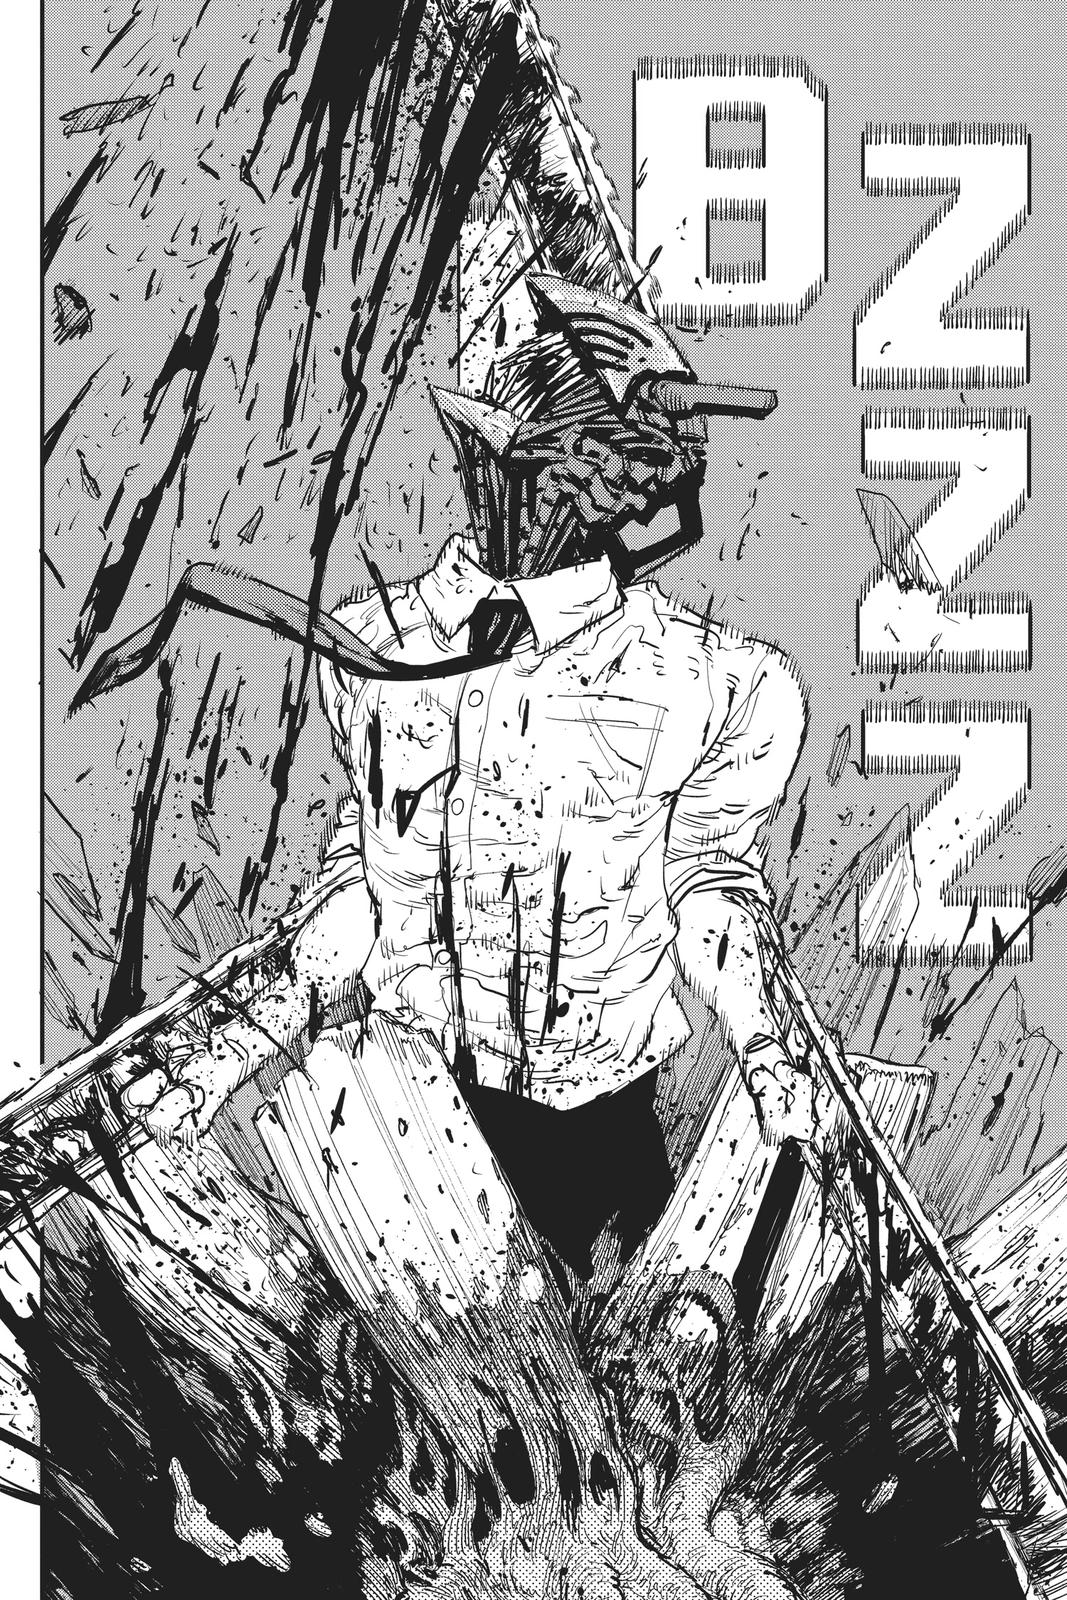 Chainsaw Man Ch. 18 Miss-print? Is this supposed to be this way